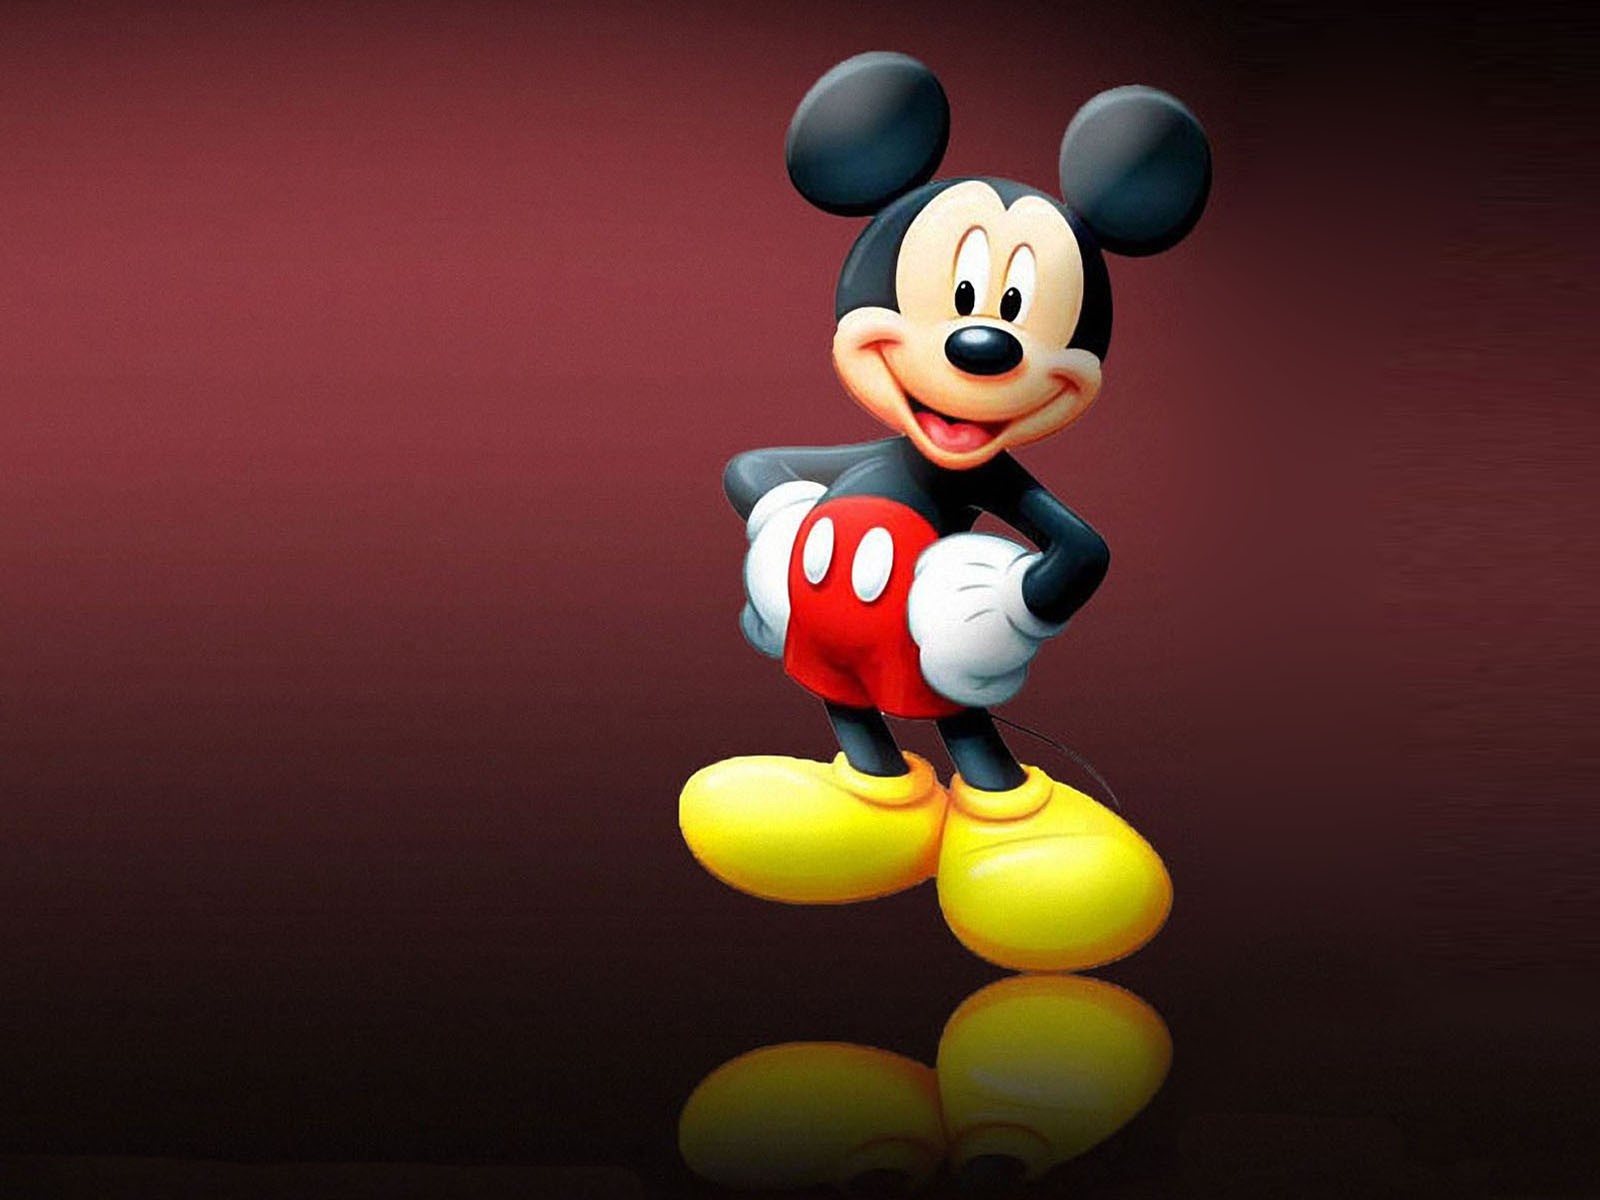 Mickey Mouse Cartoon Wallpaper HD For Mobile Phones And Laptops, Wallpaper13.com